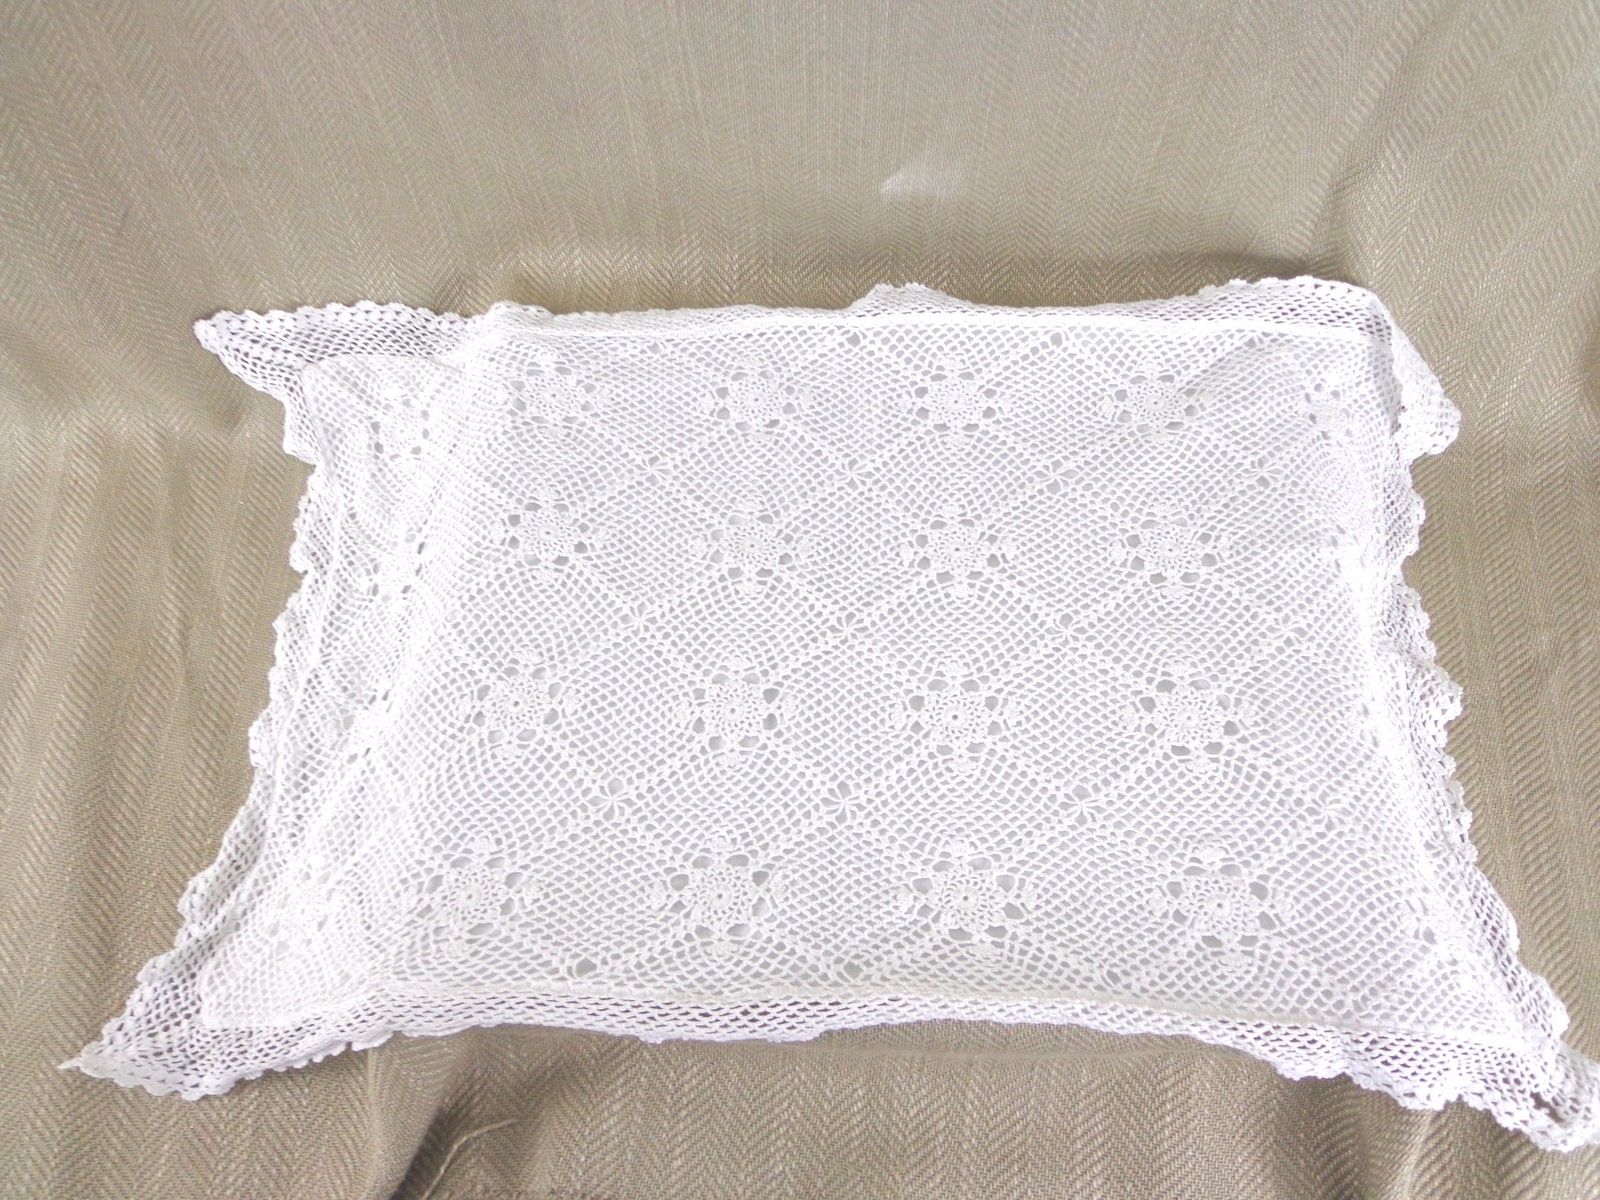 Antique Lace Pillow Cushion Cover Handmade Embroidered White Cotton Vintage